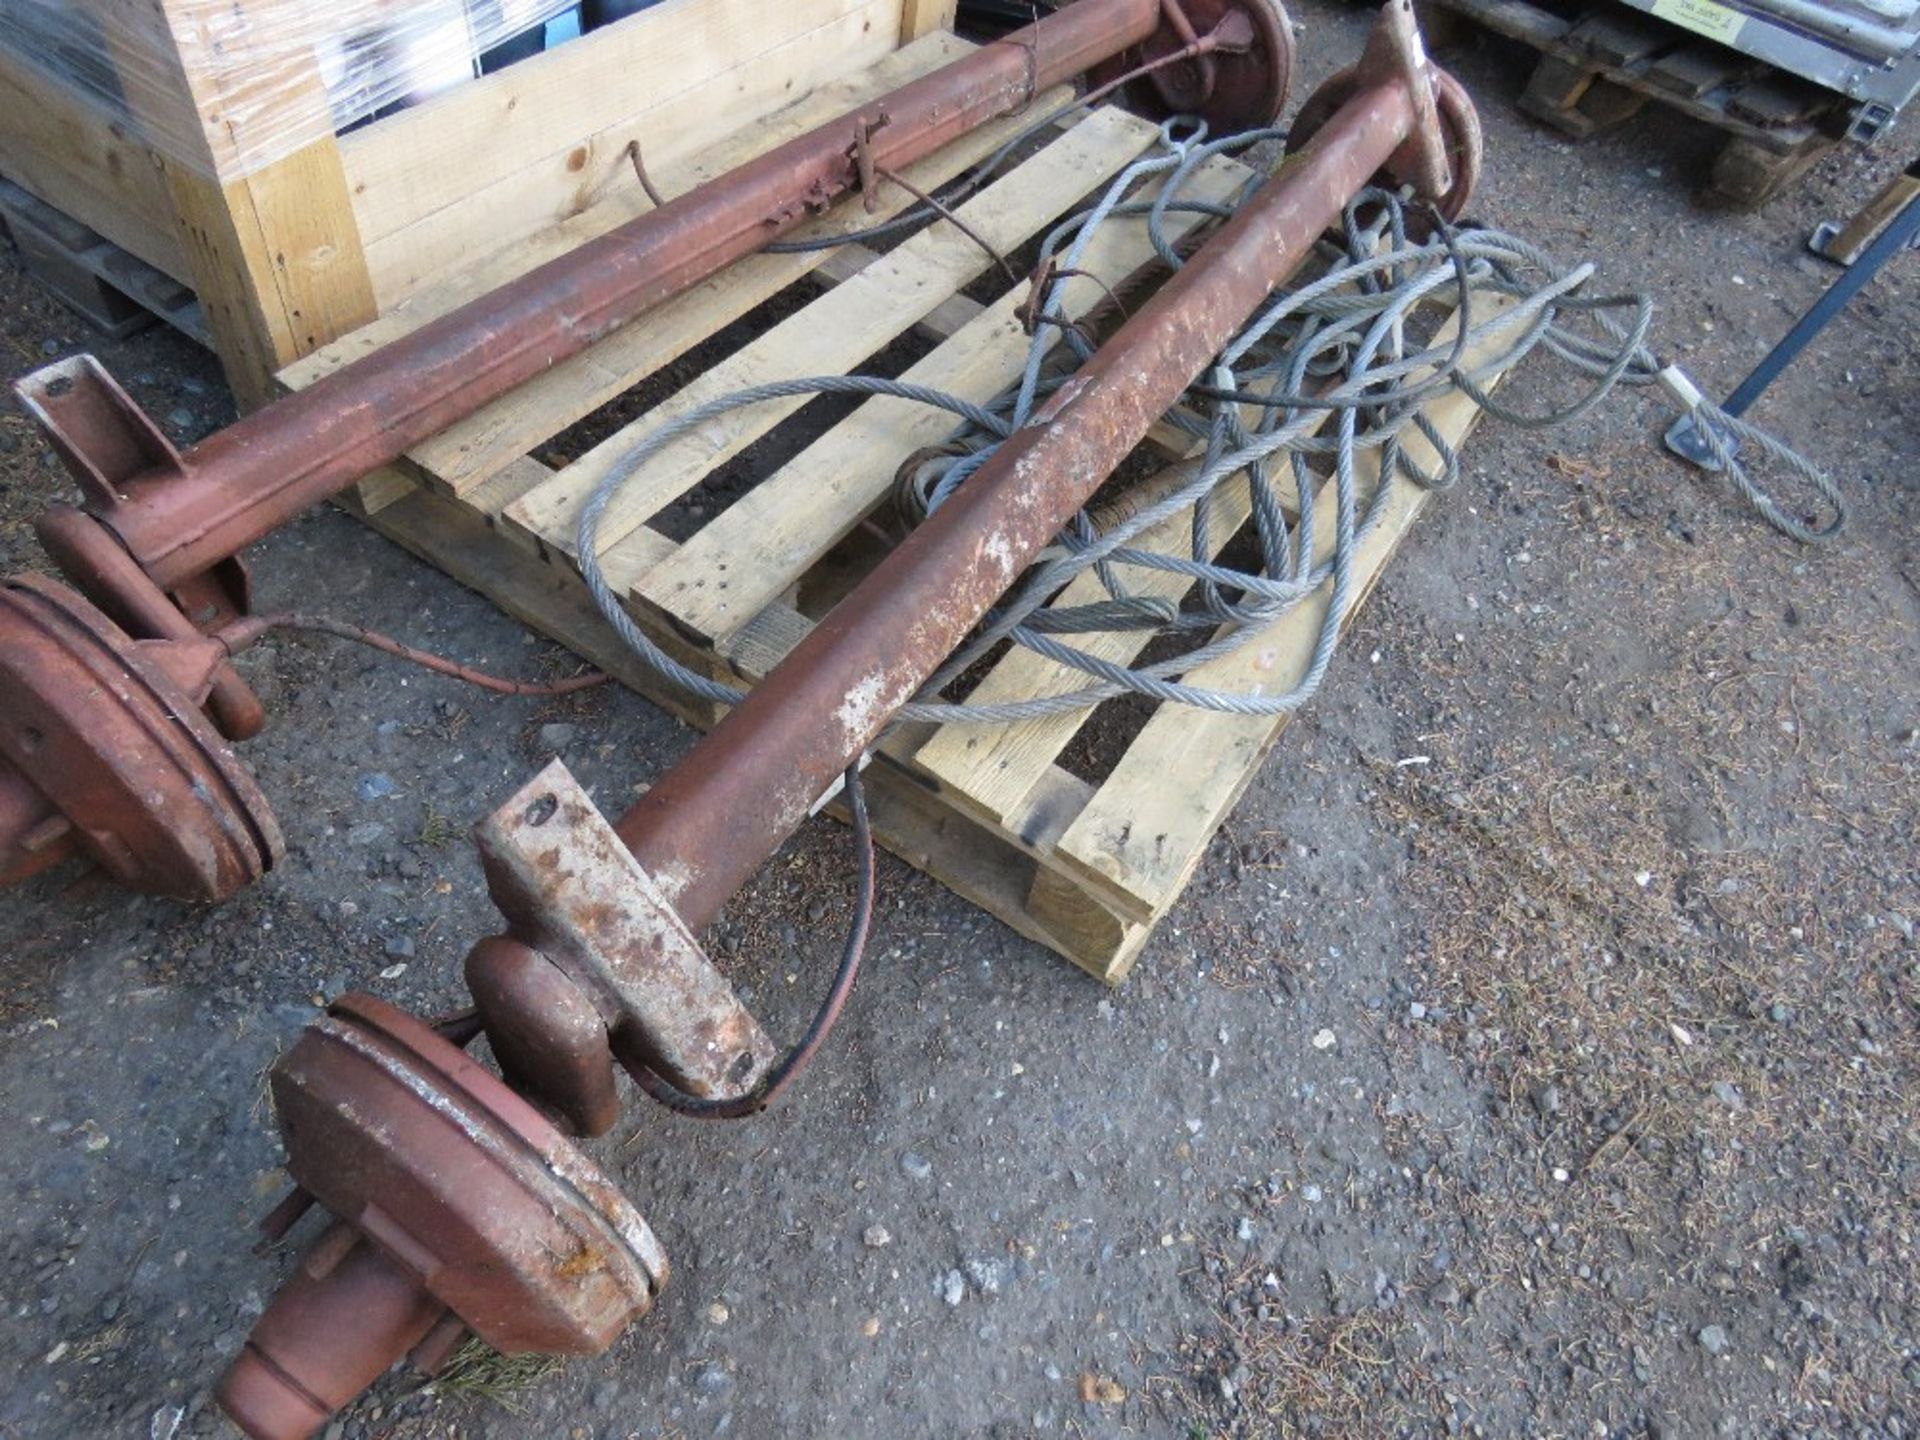 2 X TRAILER AXLES PLUS WIRE HAWSERS. - Image 2 of 2